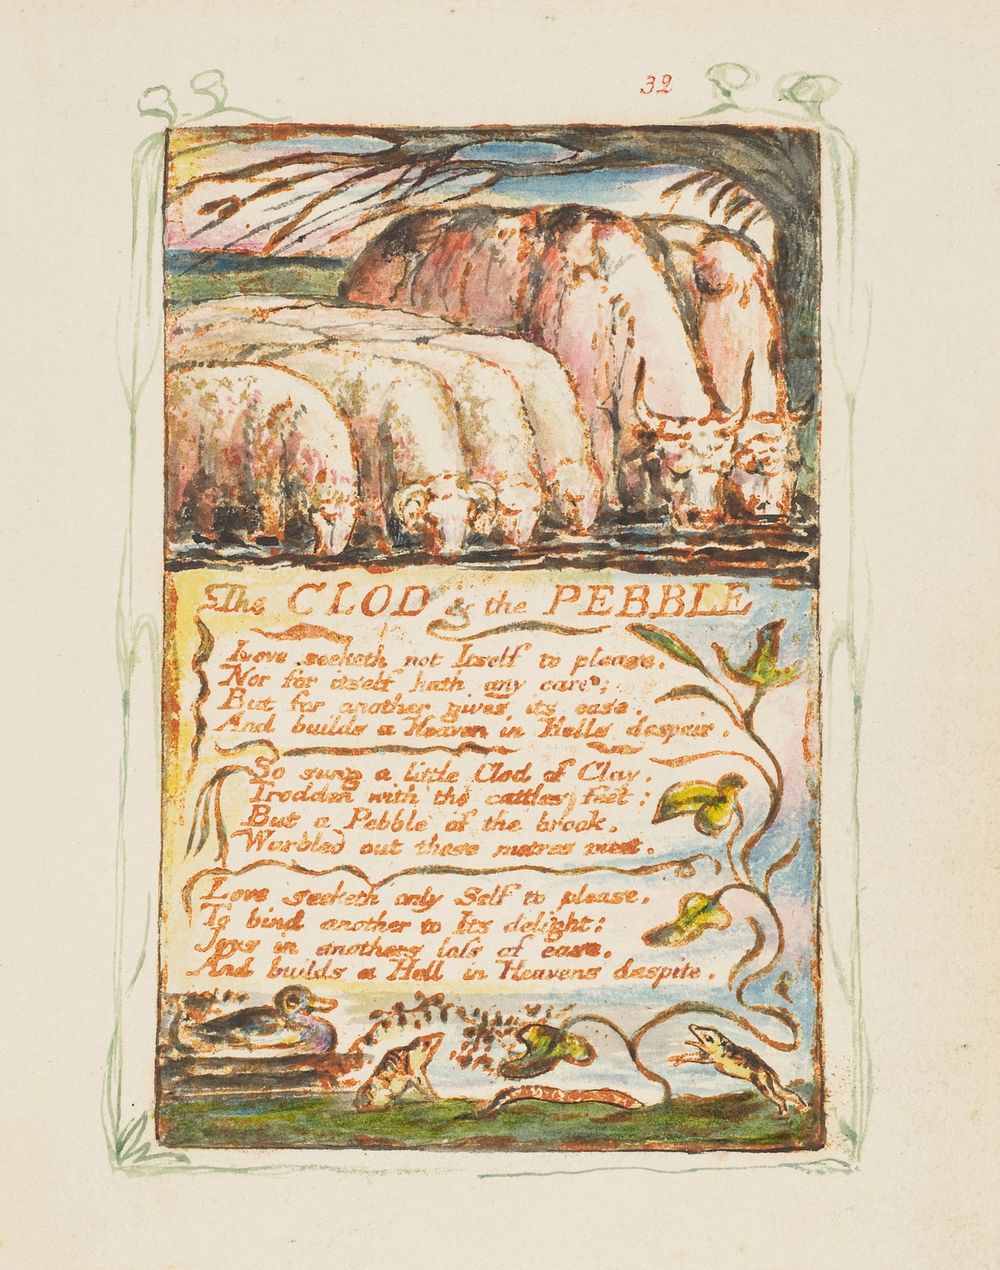 Songs of Innocence and of Experience: The Clod & the Pebble by William Blake. Original from The Metropolitan Museum of Art.